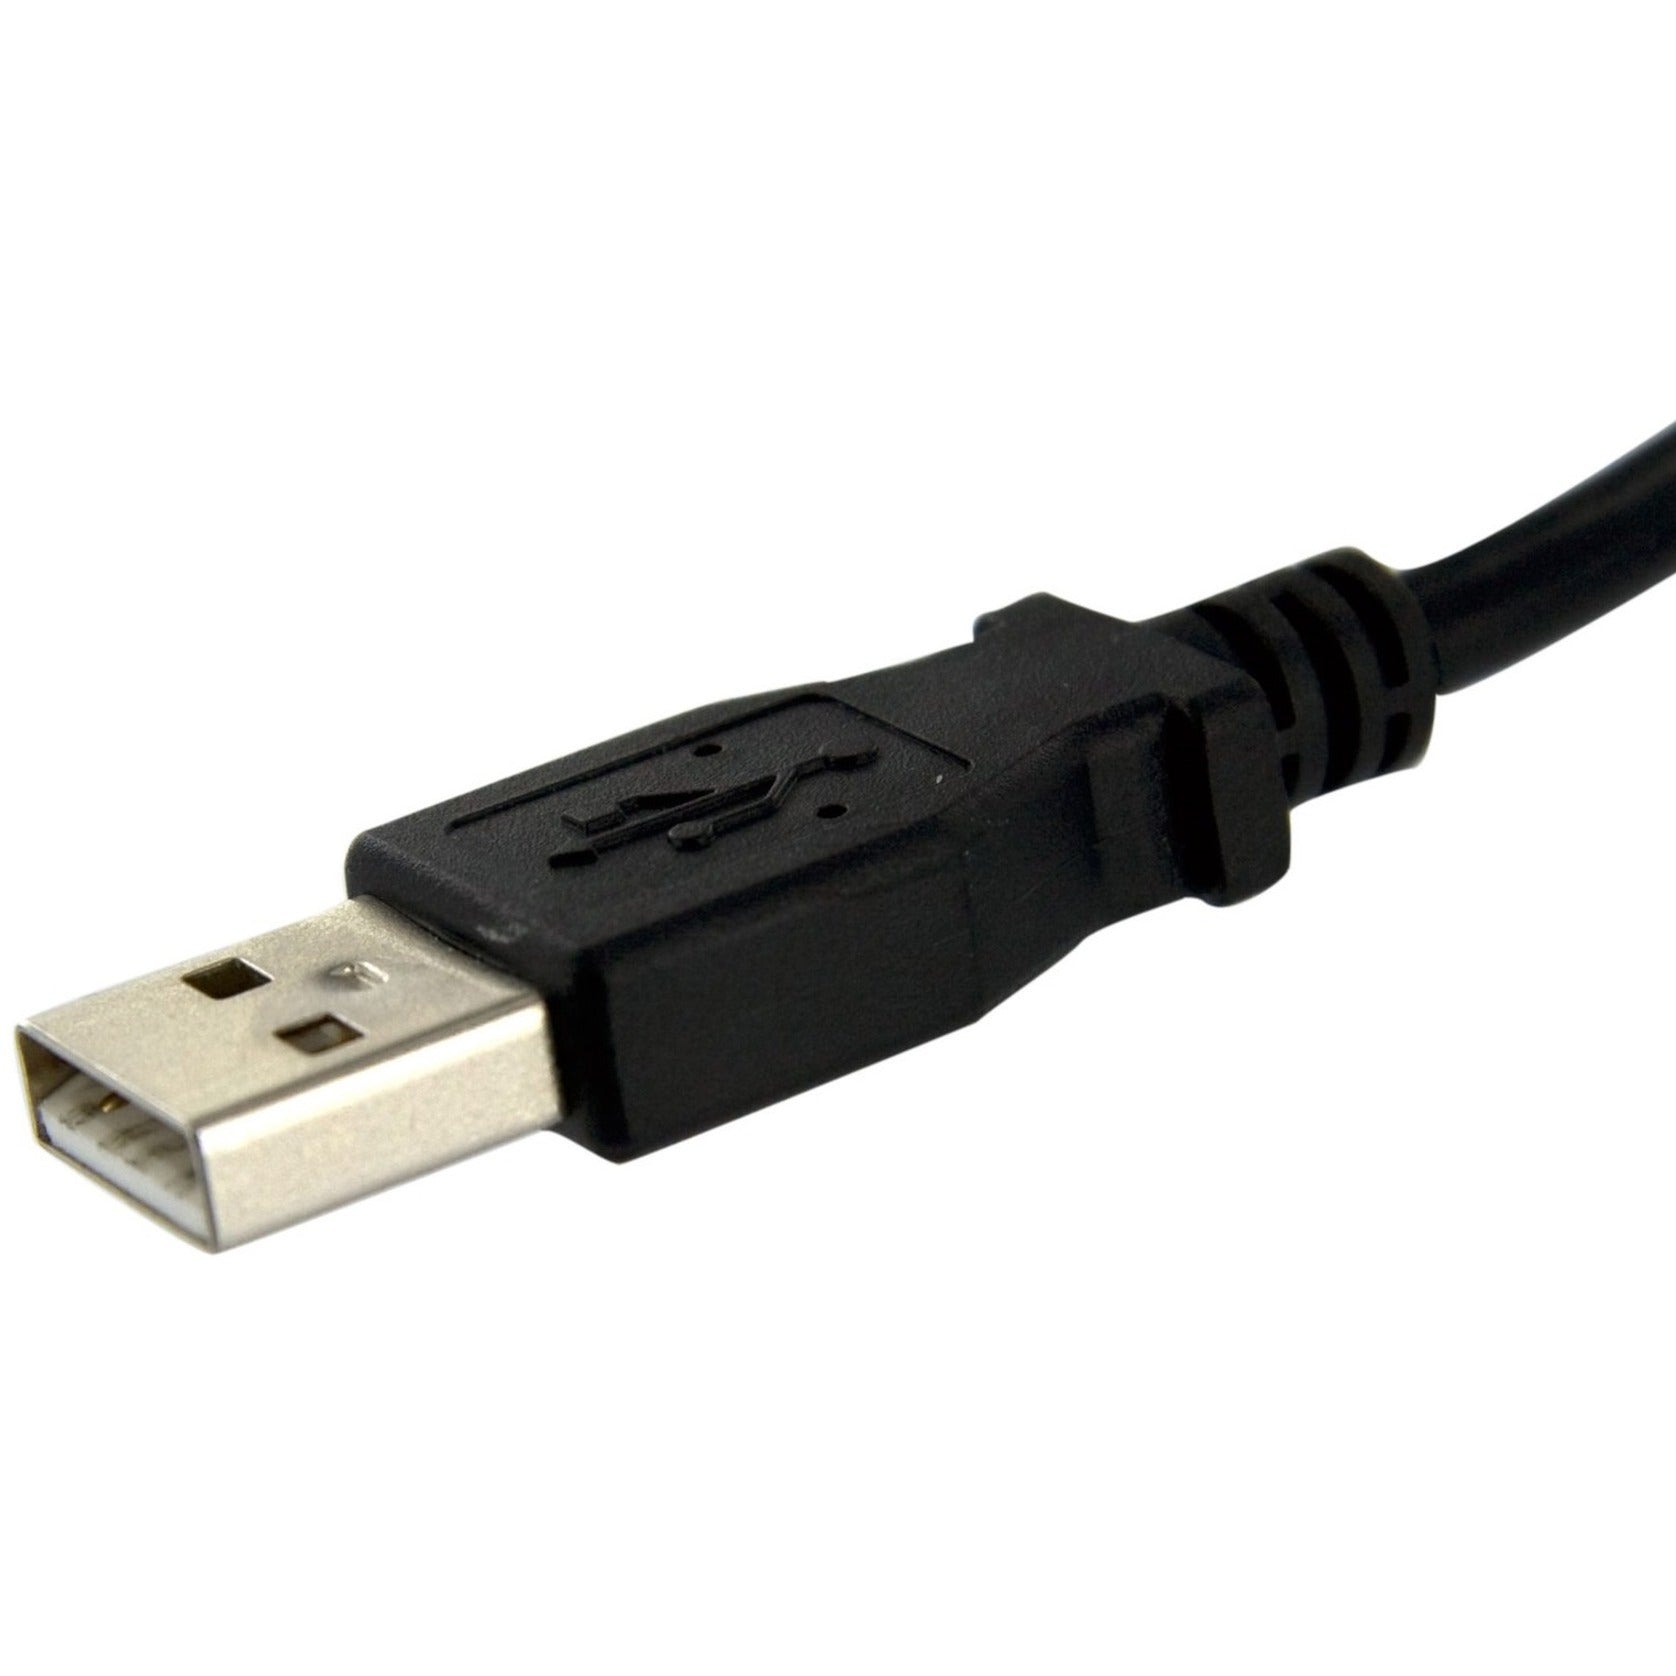 StarTech.com USBPNLAFAM3 3 ft Panel Mount USB Cable A to A - F/M, Data Transfer Cable